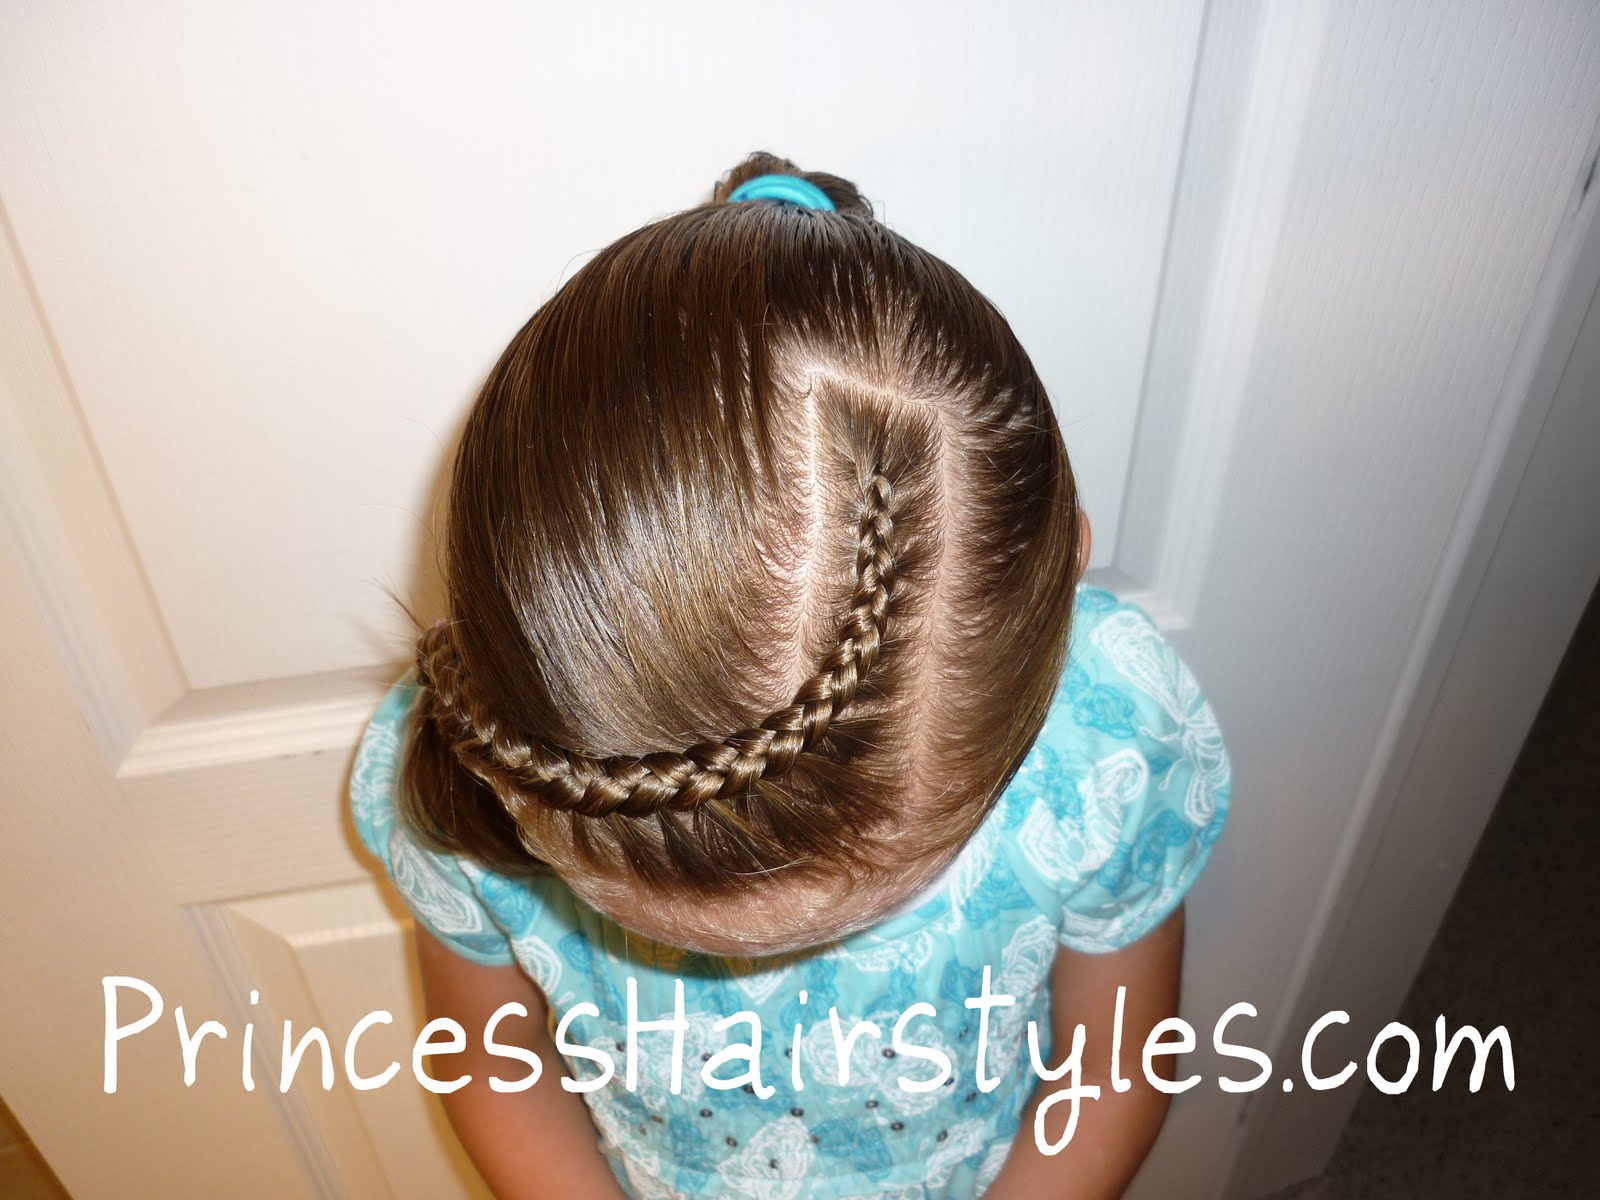 30 Easy Braided Hairstyles - Braided Hairstyles for Women and Kids